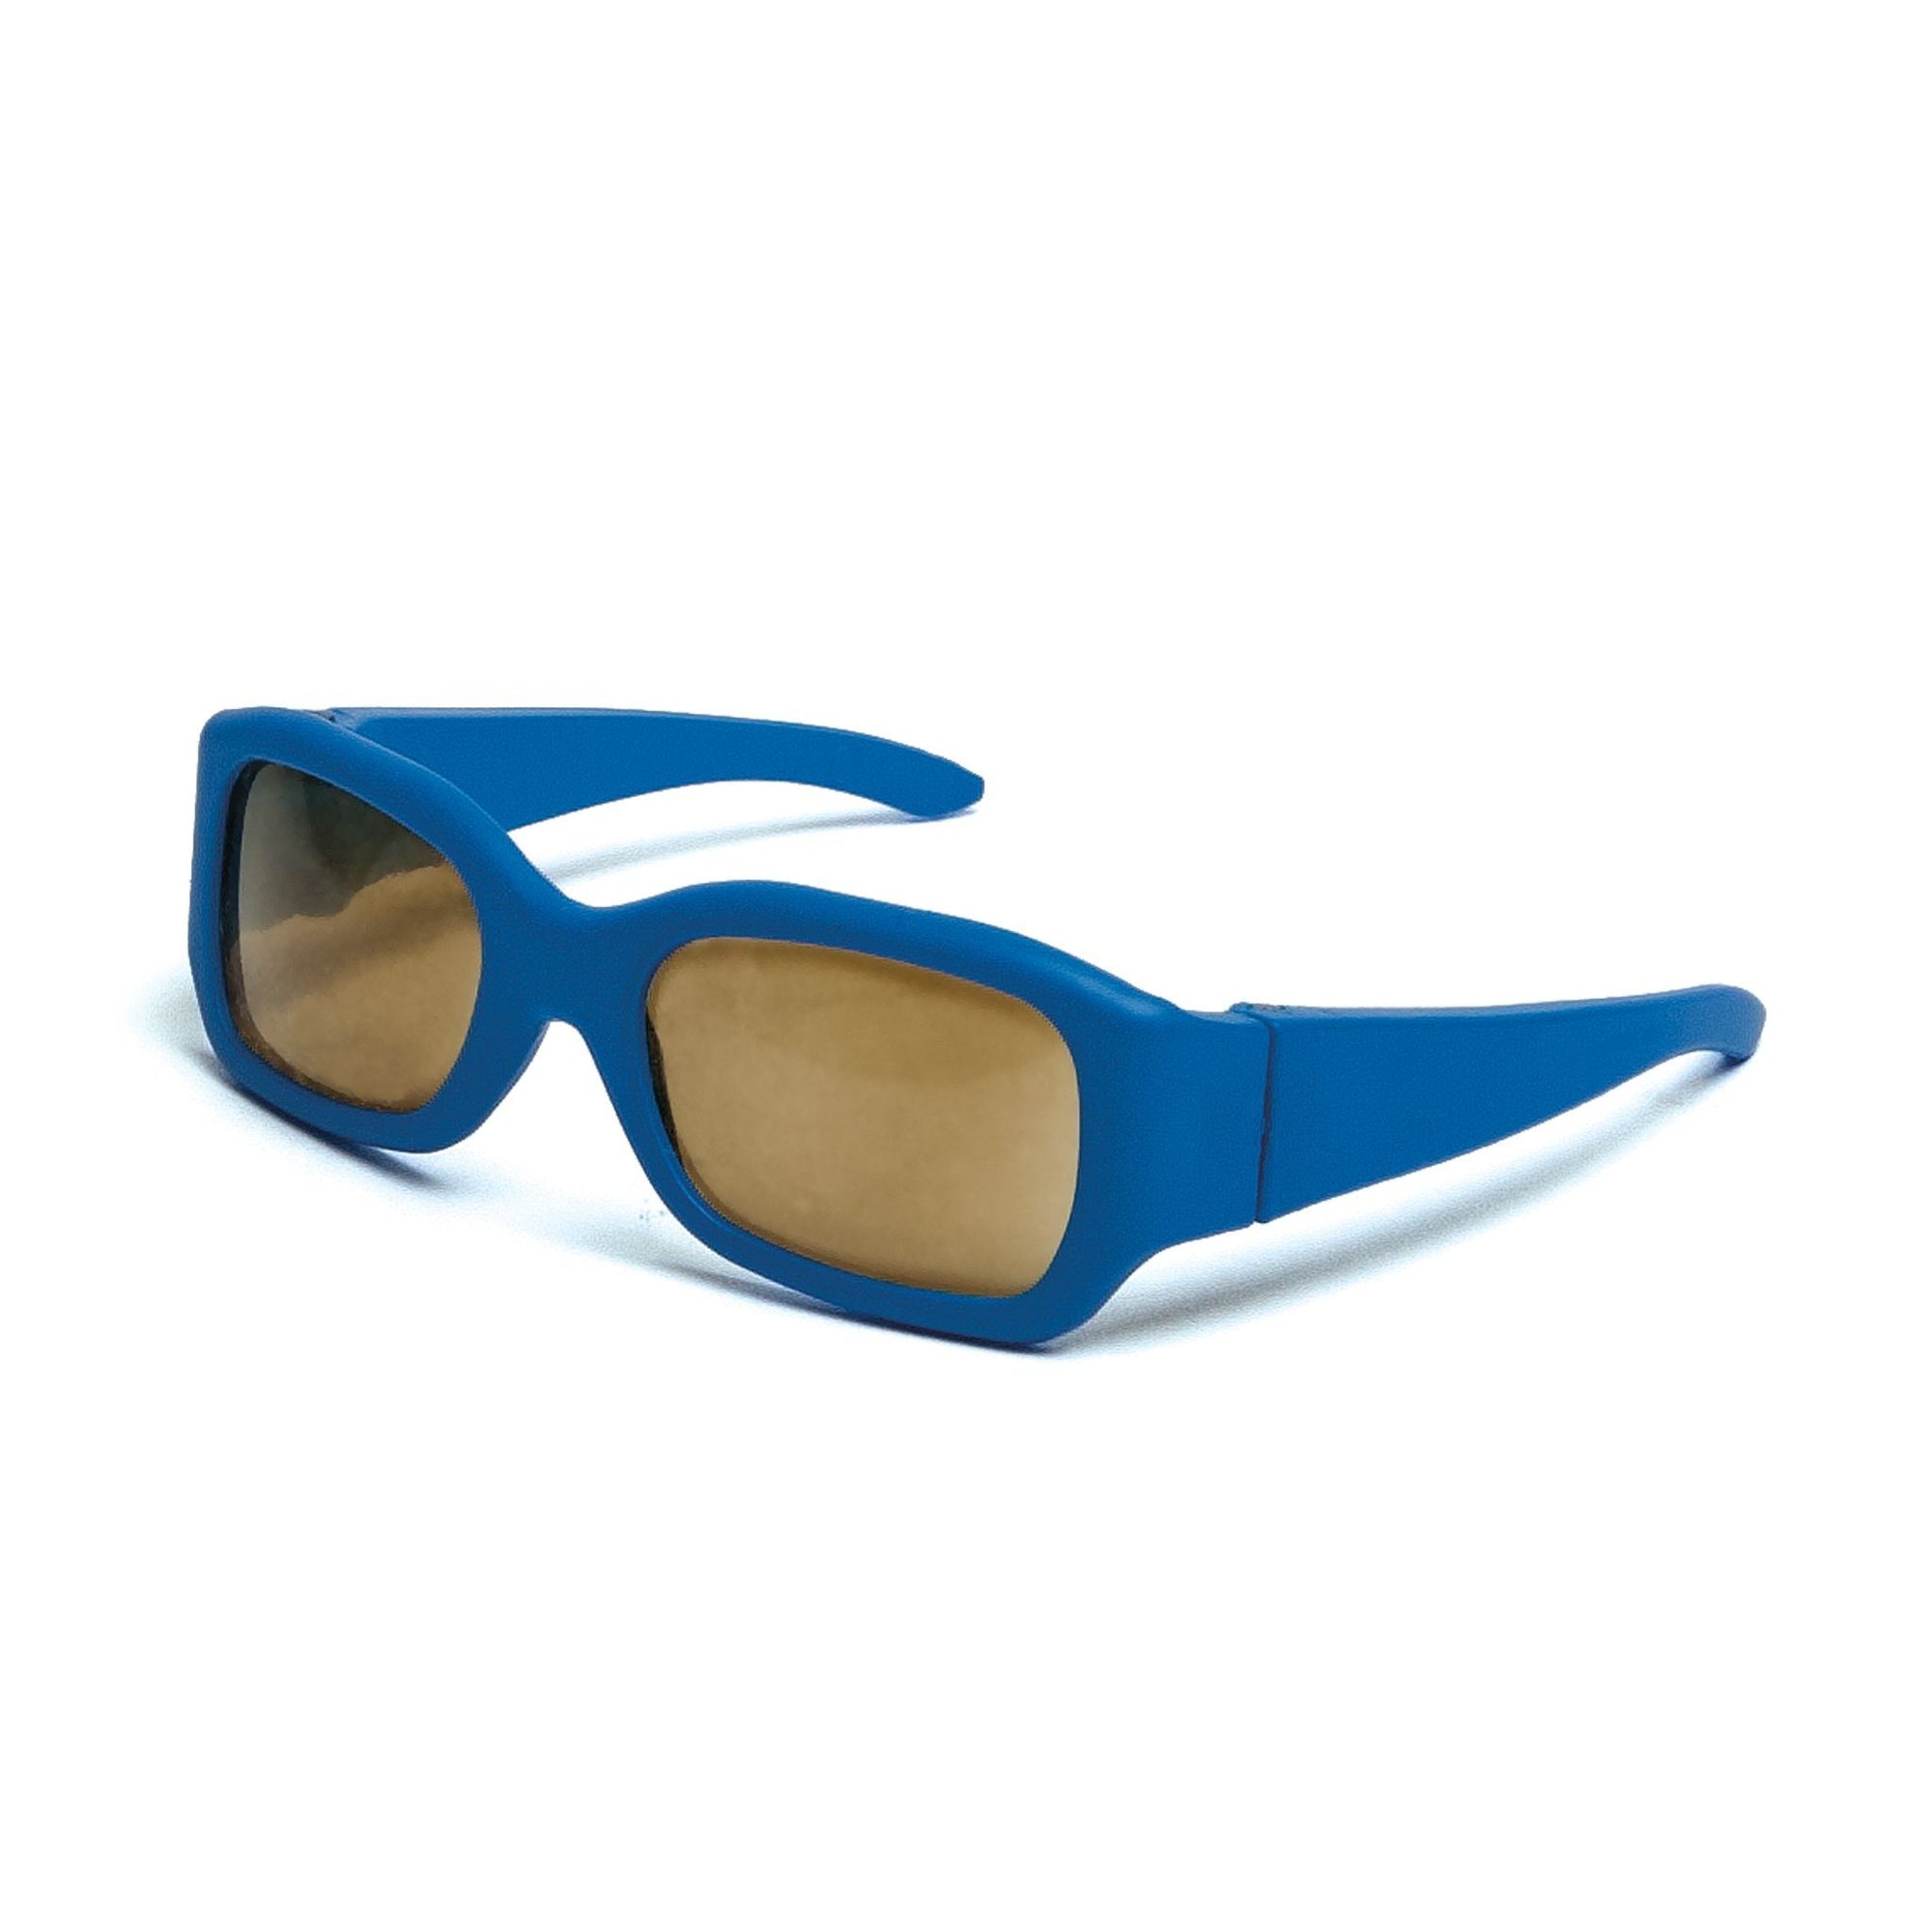 Blue sunglasses fit all 18 inch dolls